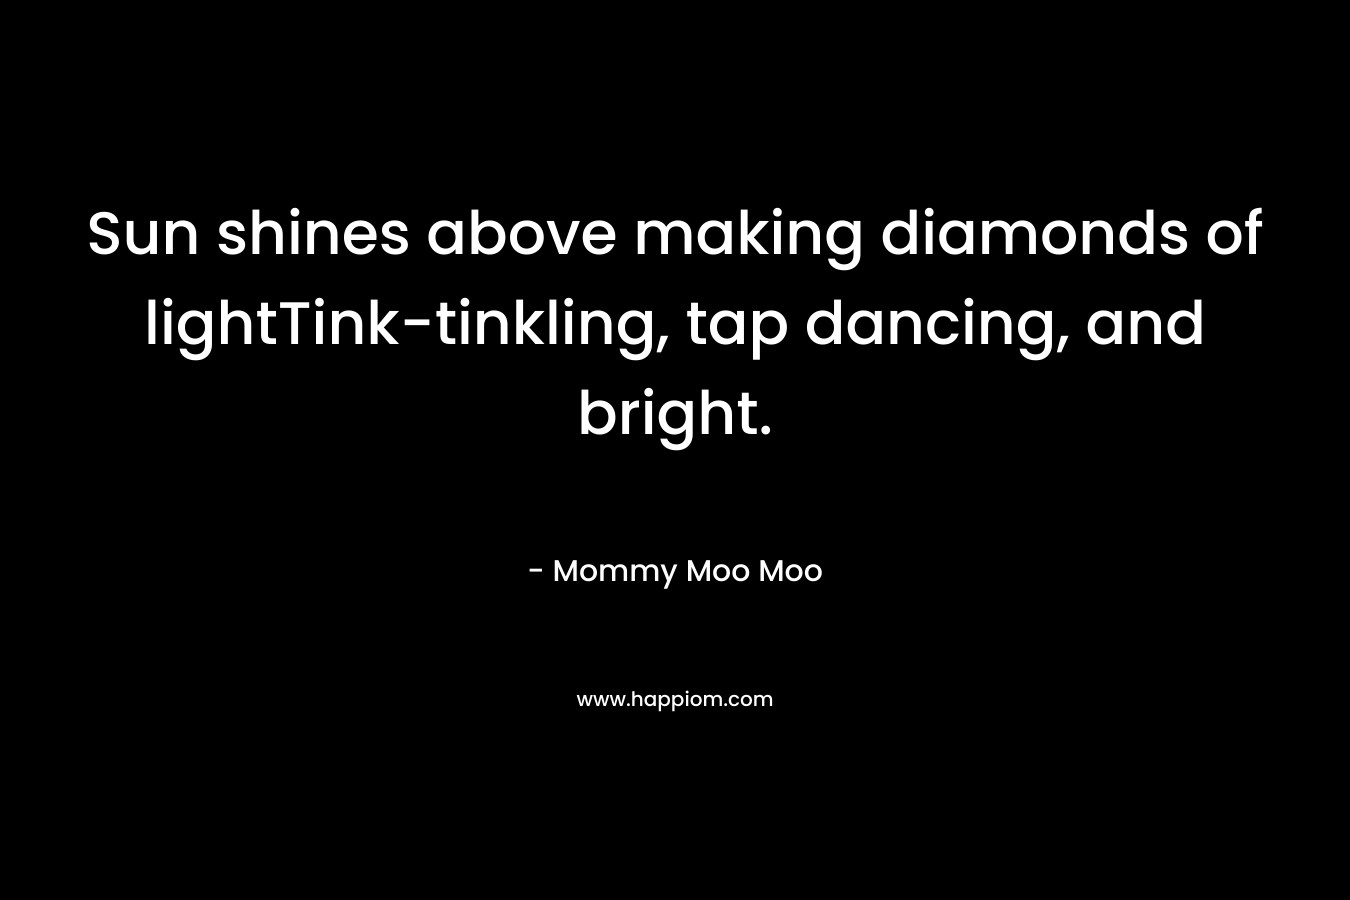 Sun shines above making diamonds of lightTink-tinkling, tap dancing, and bright.